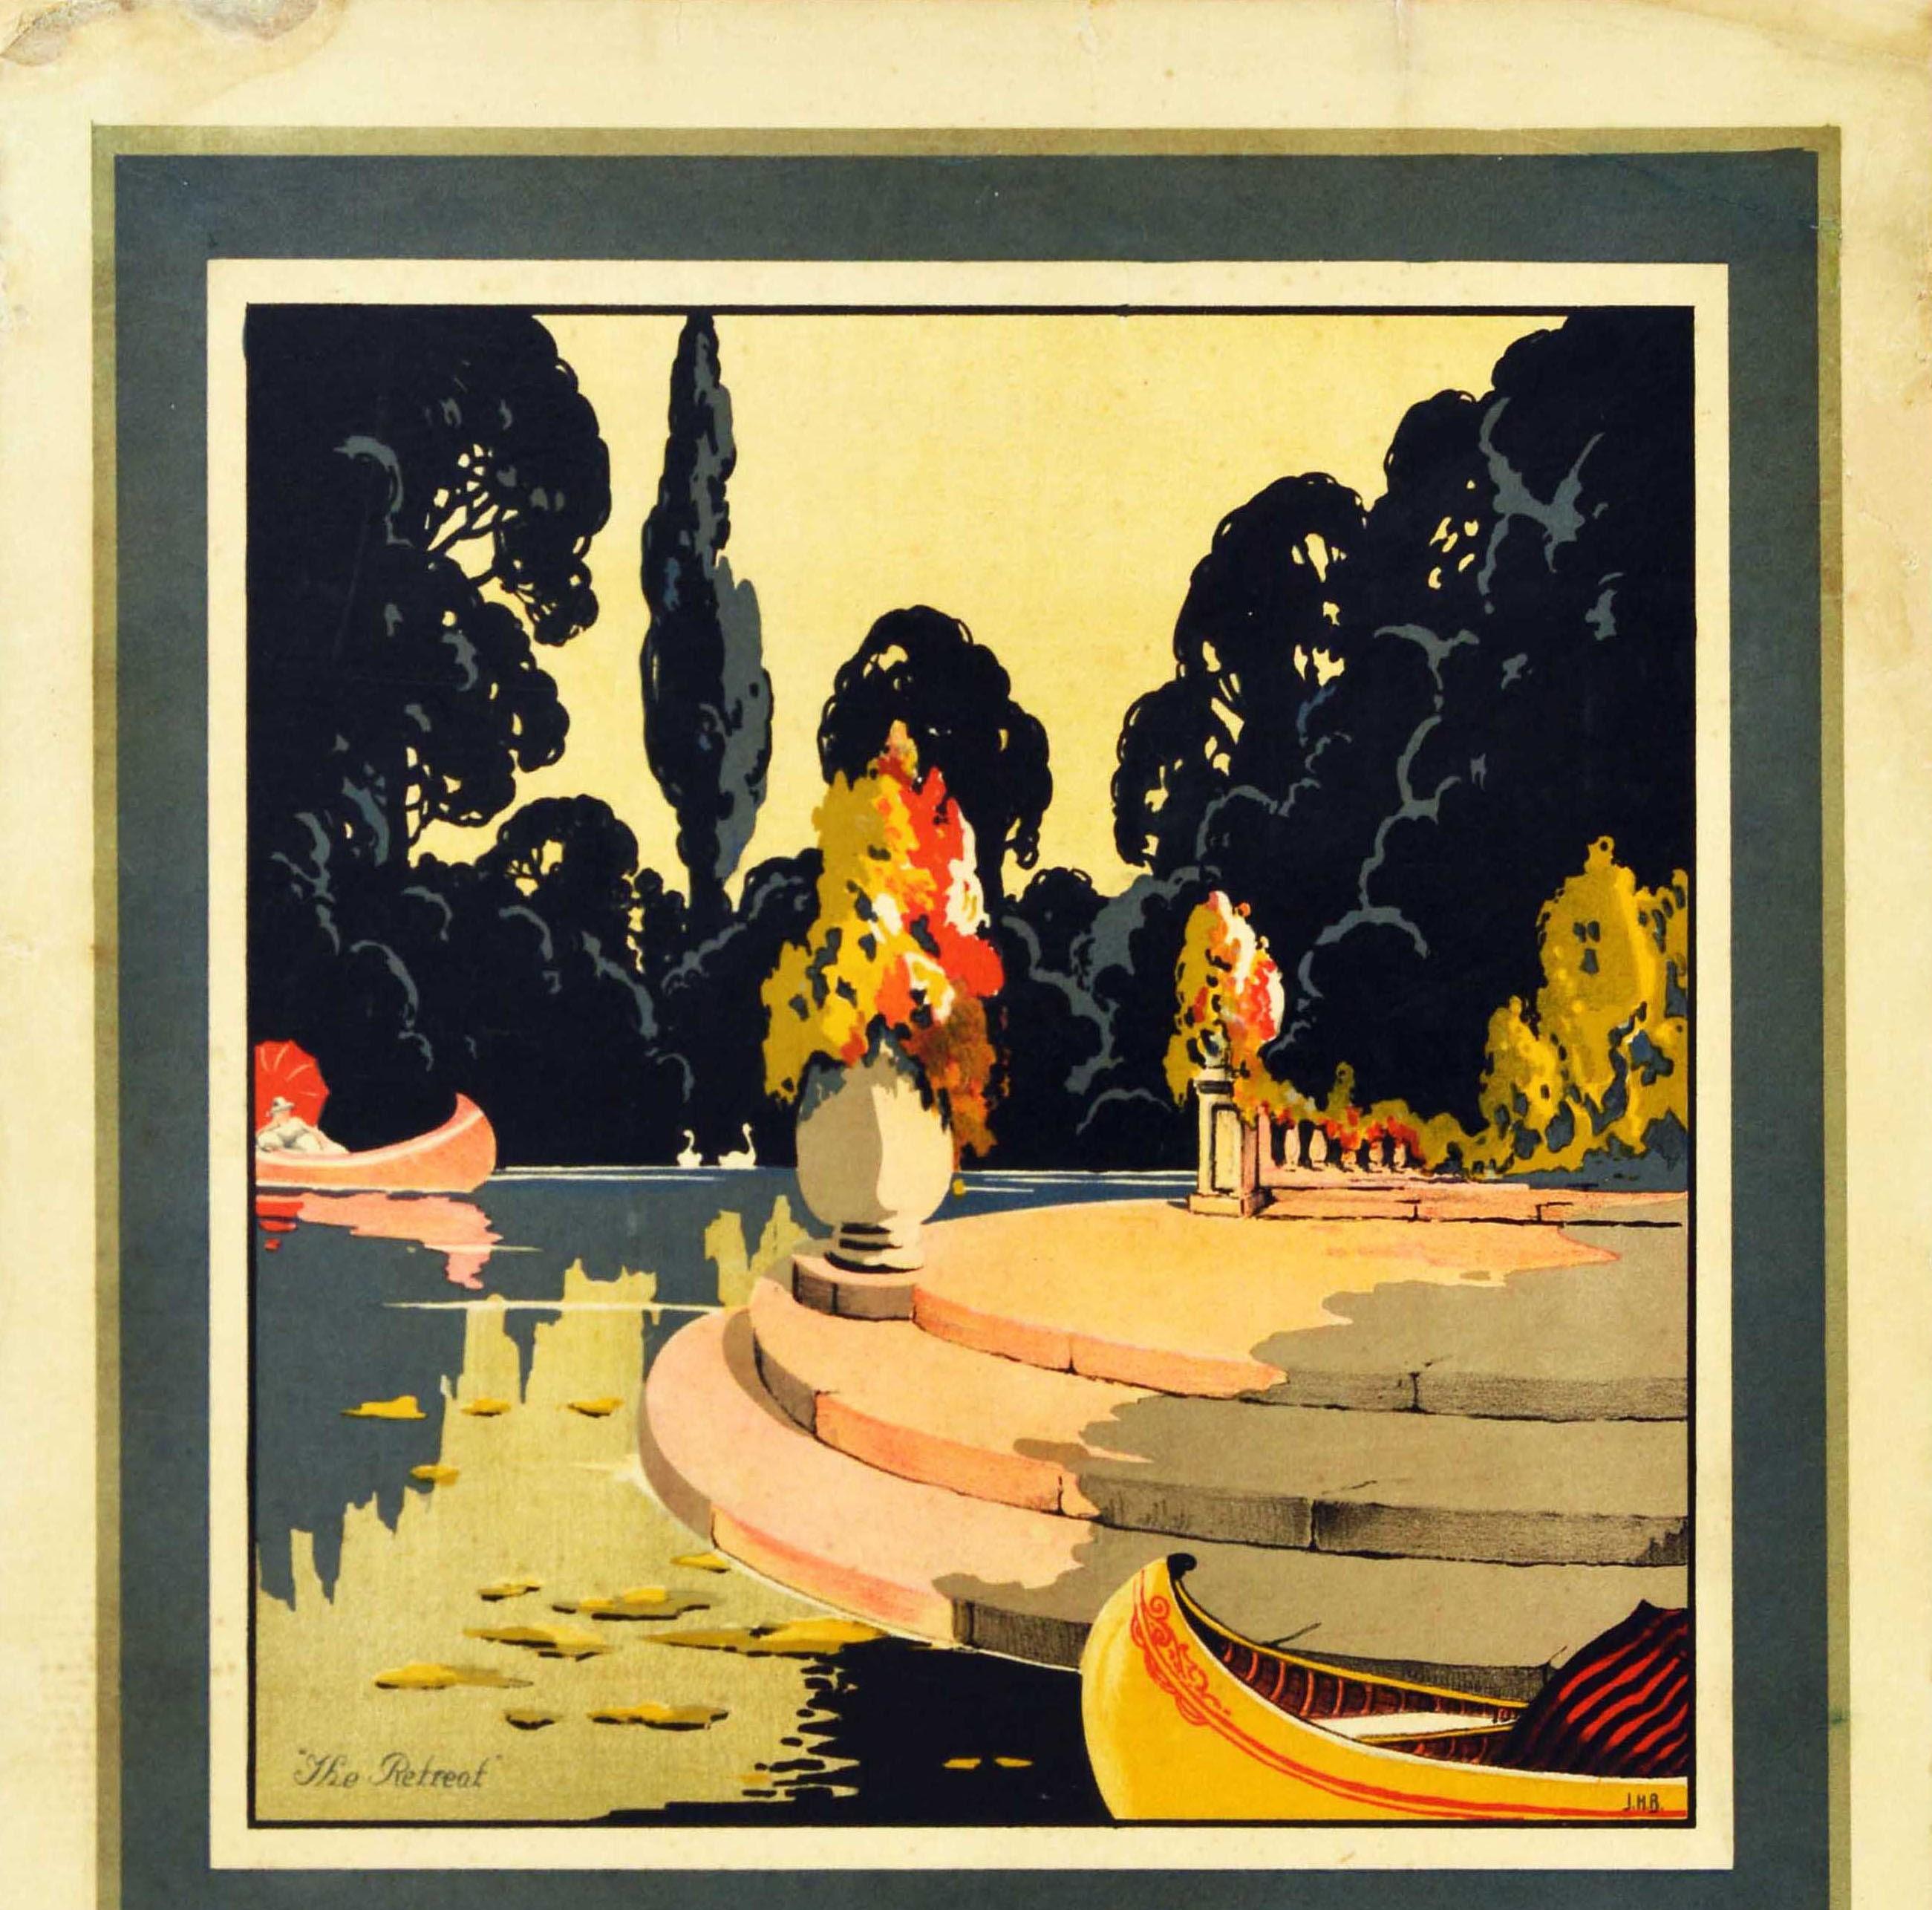 Original vintage drink advertising poster - Blends of Tea with a superior flavour at popular prices - featuring stunning artwork titled The Retreat depicting a scenic view of boats on the water in a park surrounded by tall trees with the bold